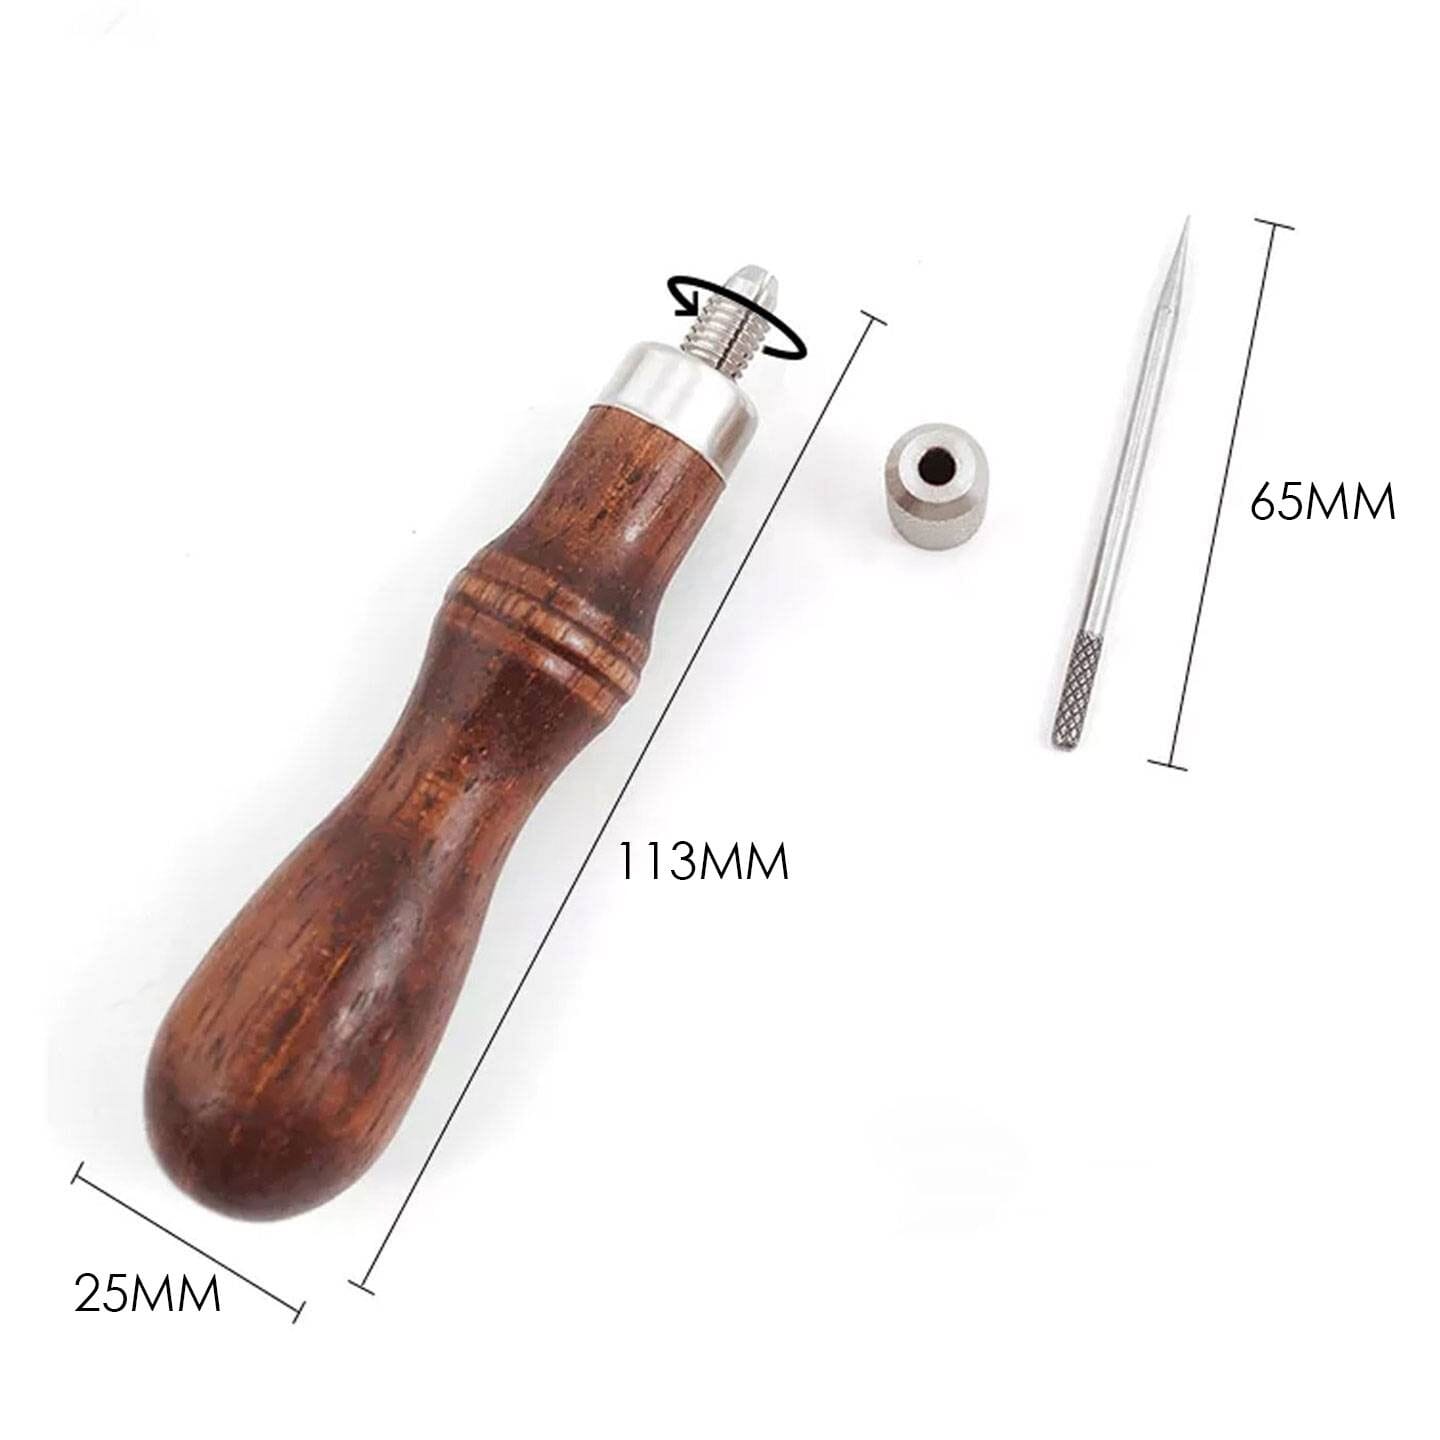 Leathercraft Stitching Tool 4 in 1 Hole Punch Set Leather Sewing Awl Kit,  with Interchangeable Blades, for Leatherworking